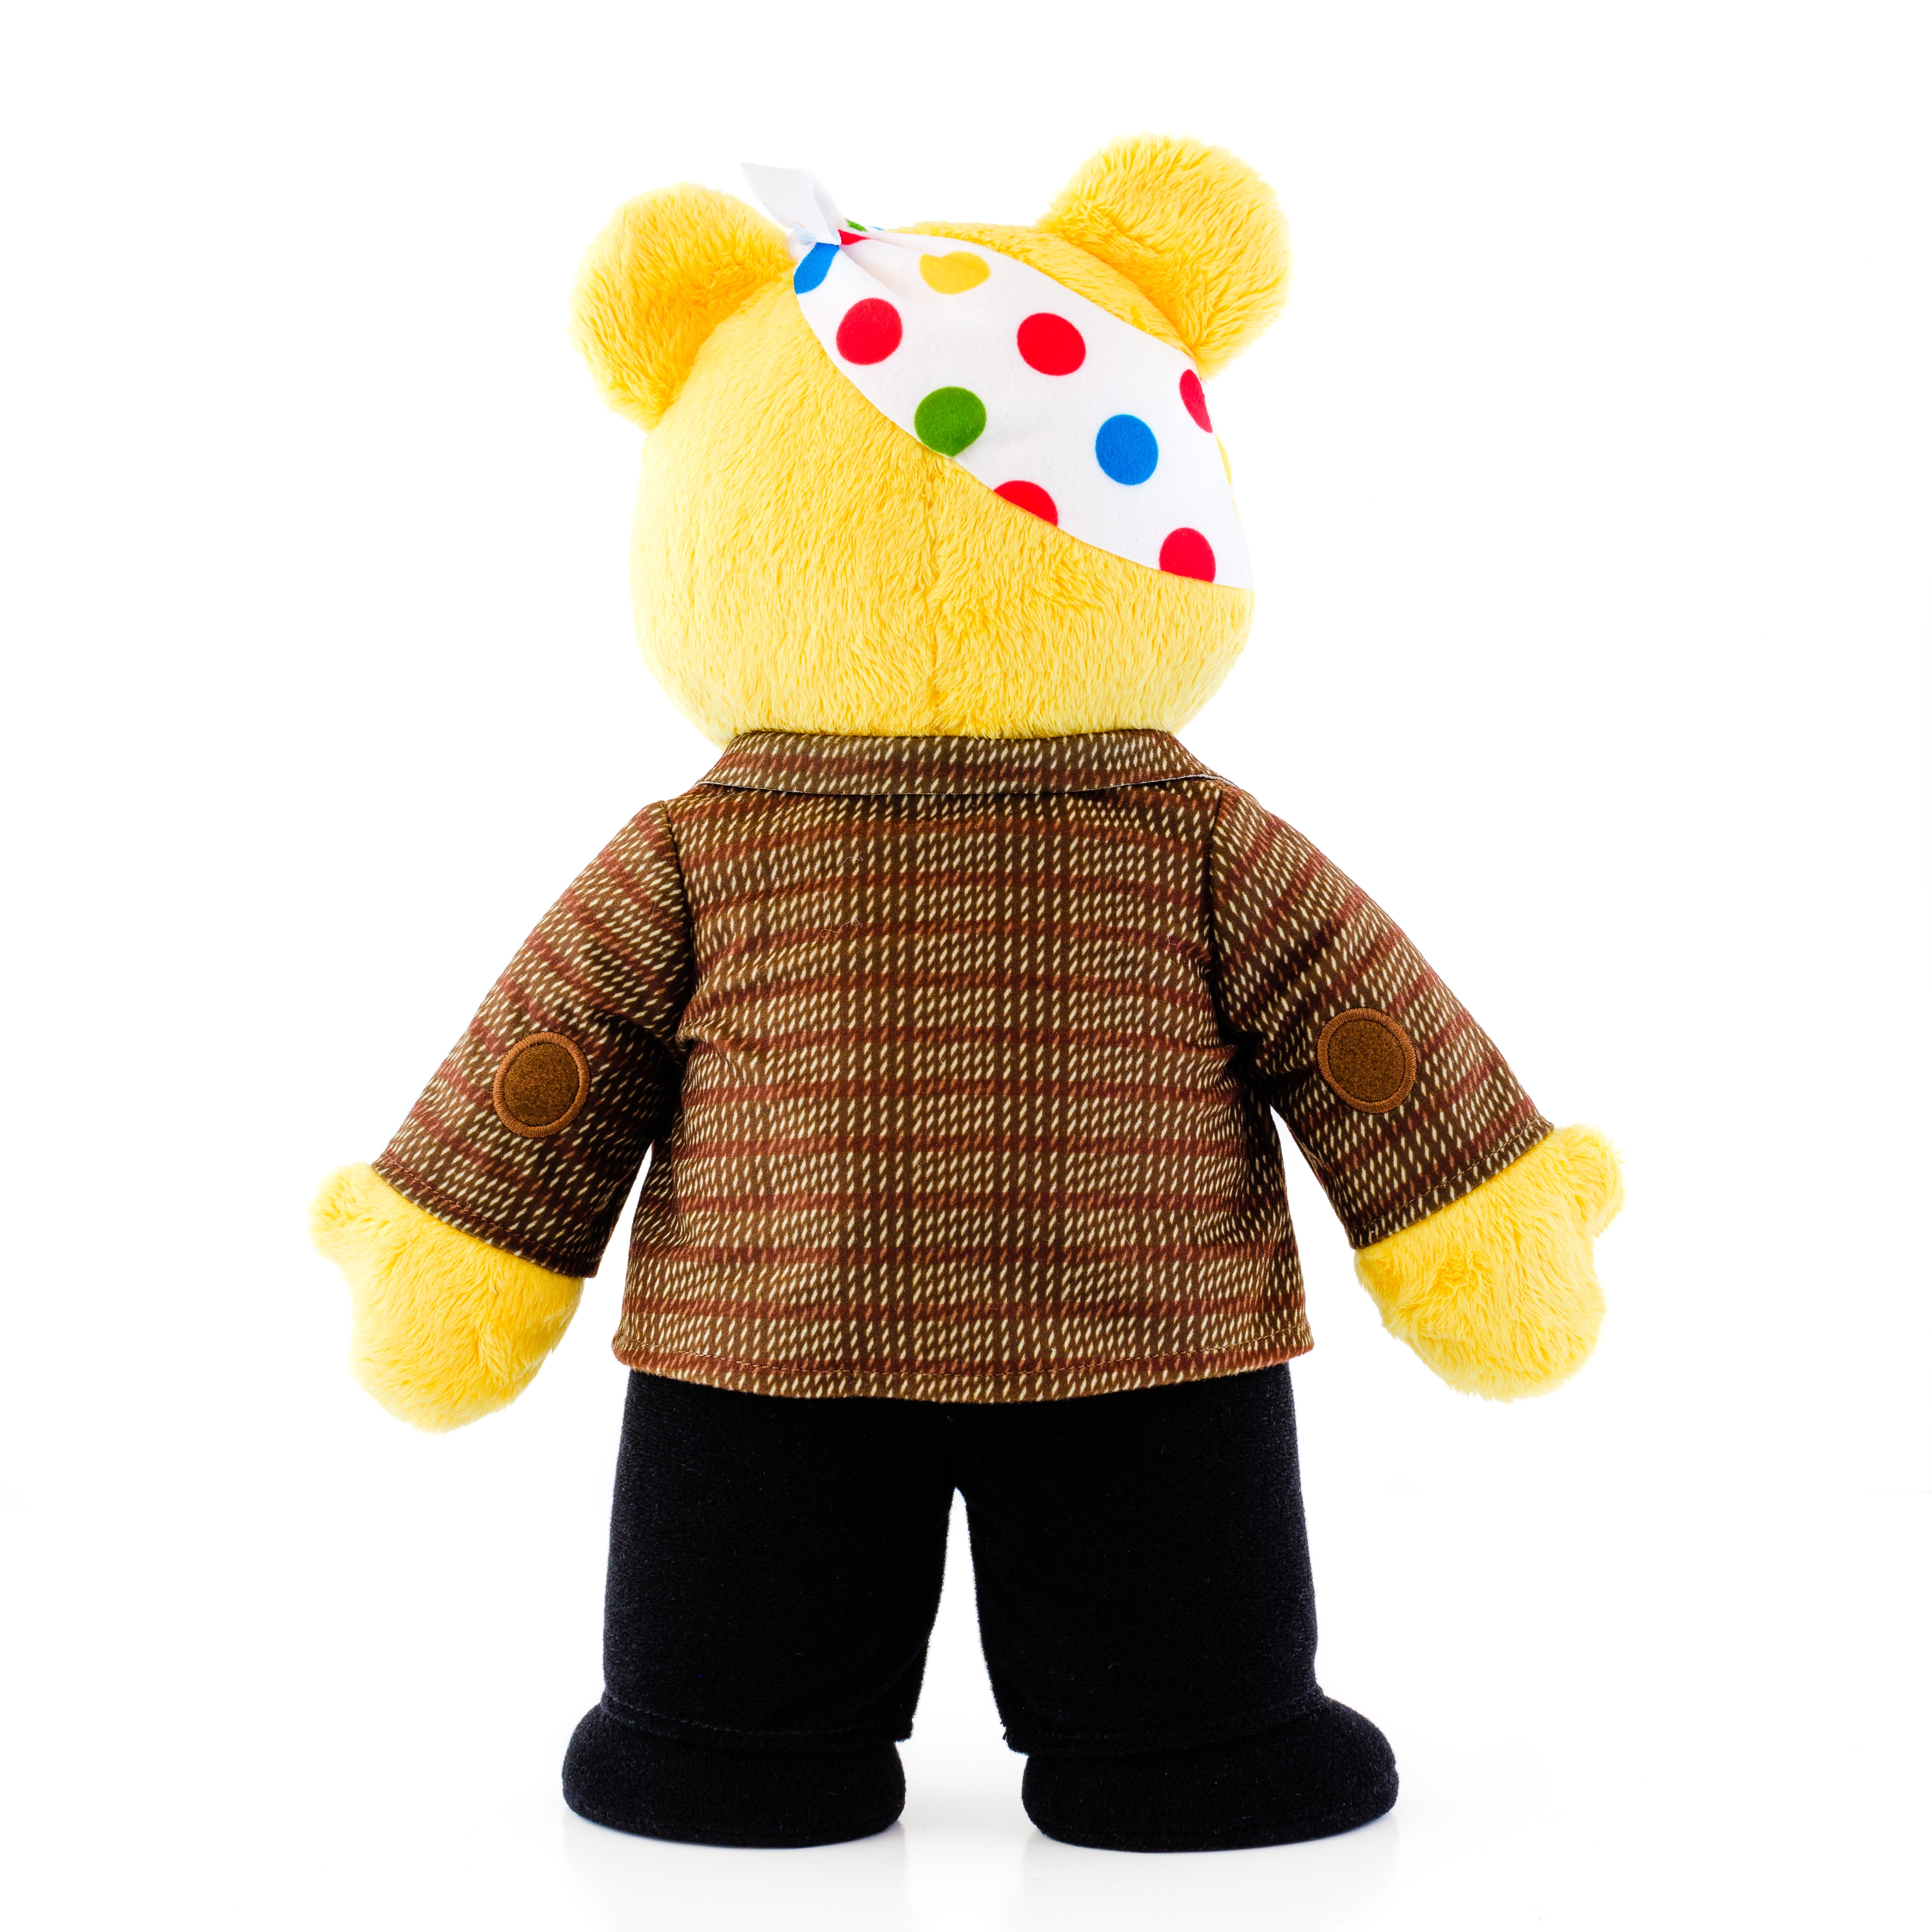 Supreme and Louis Vuitton Team Up for Charity - Limited Edition Pudsey Bear